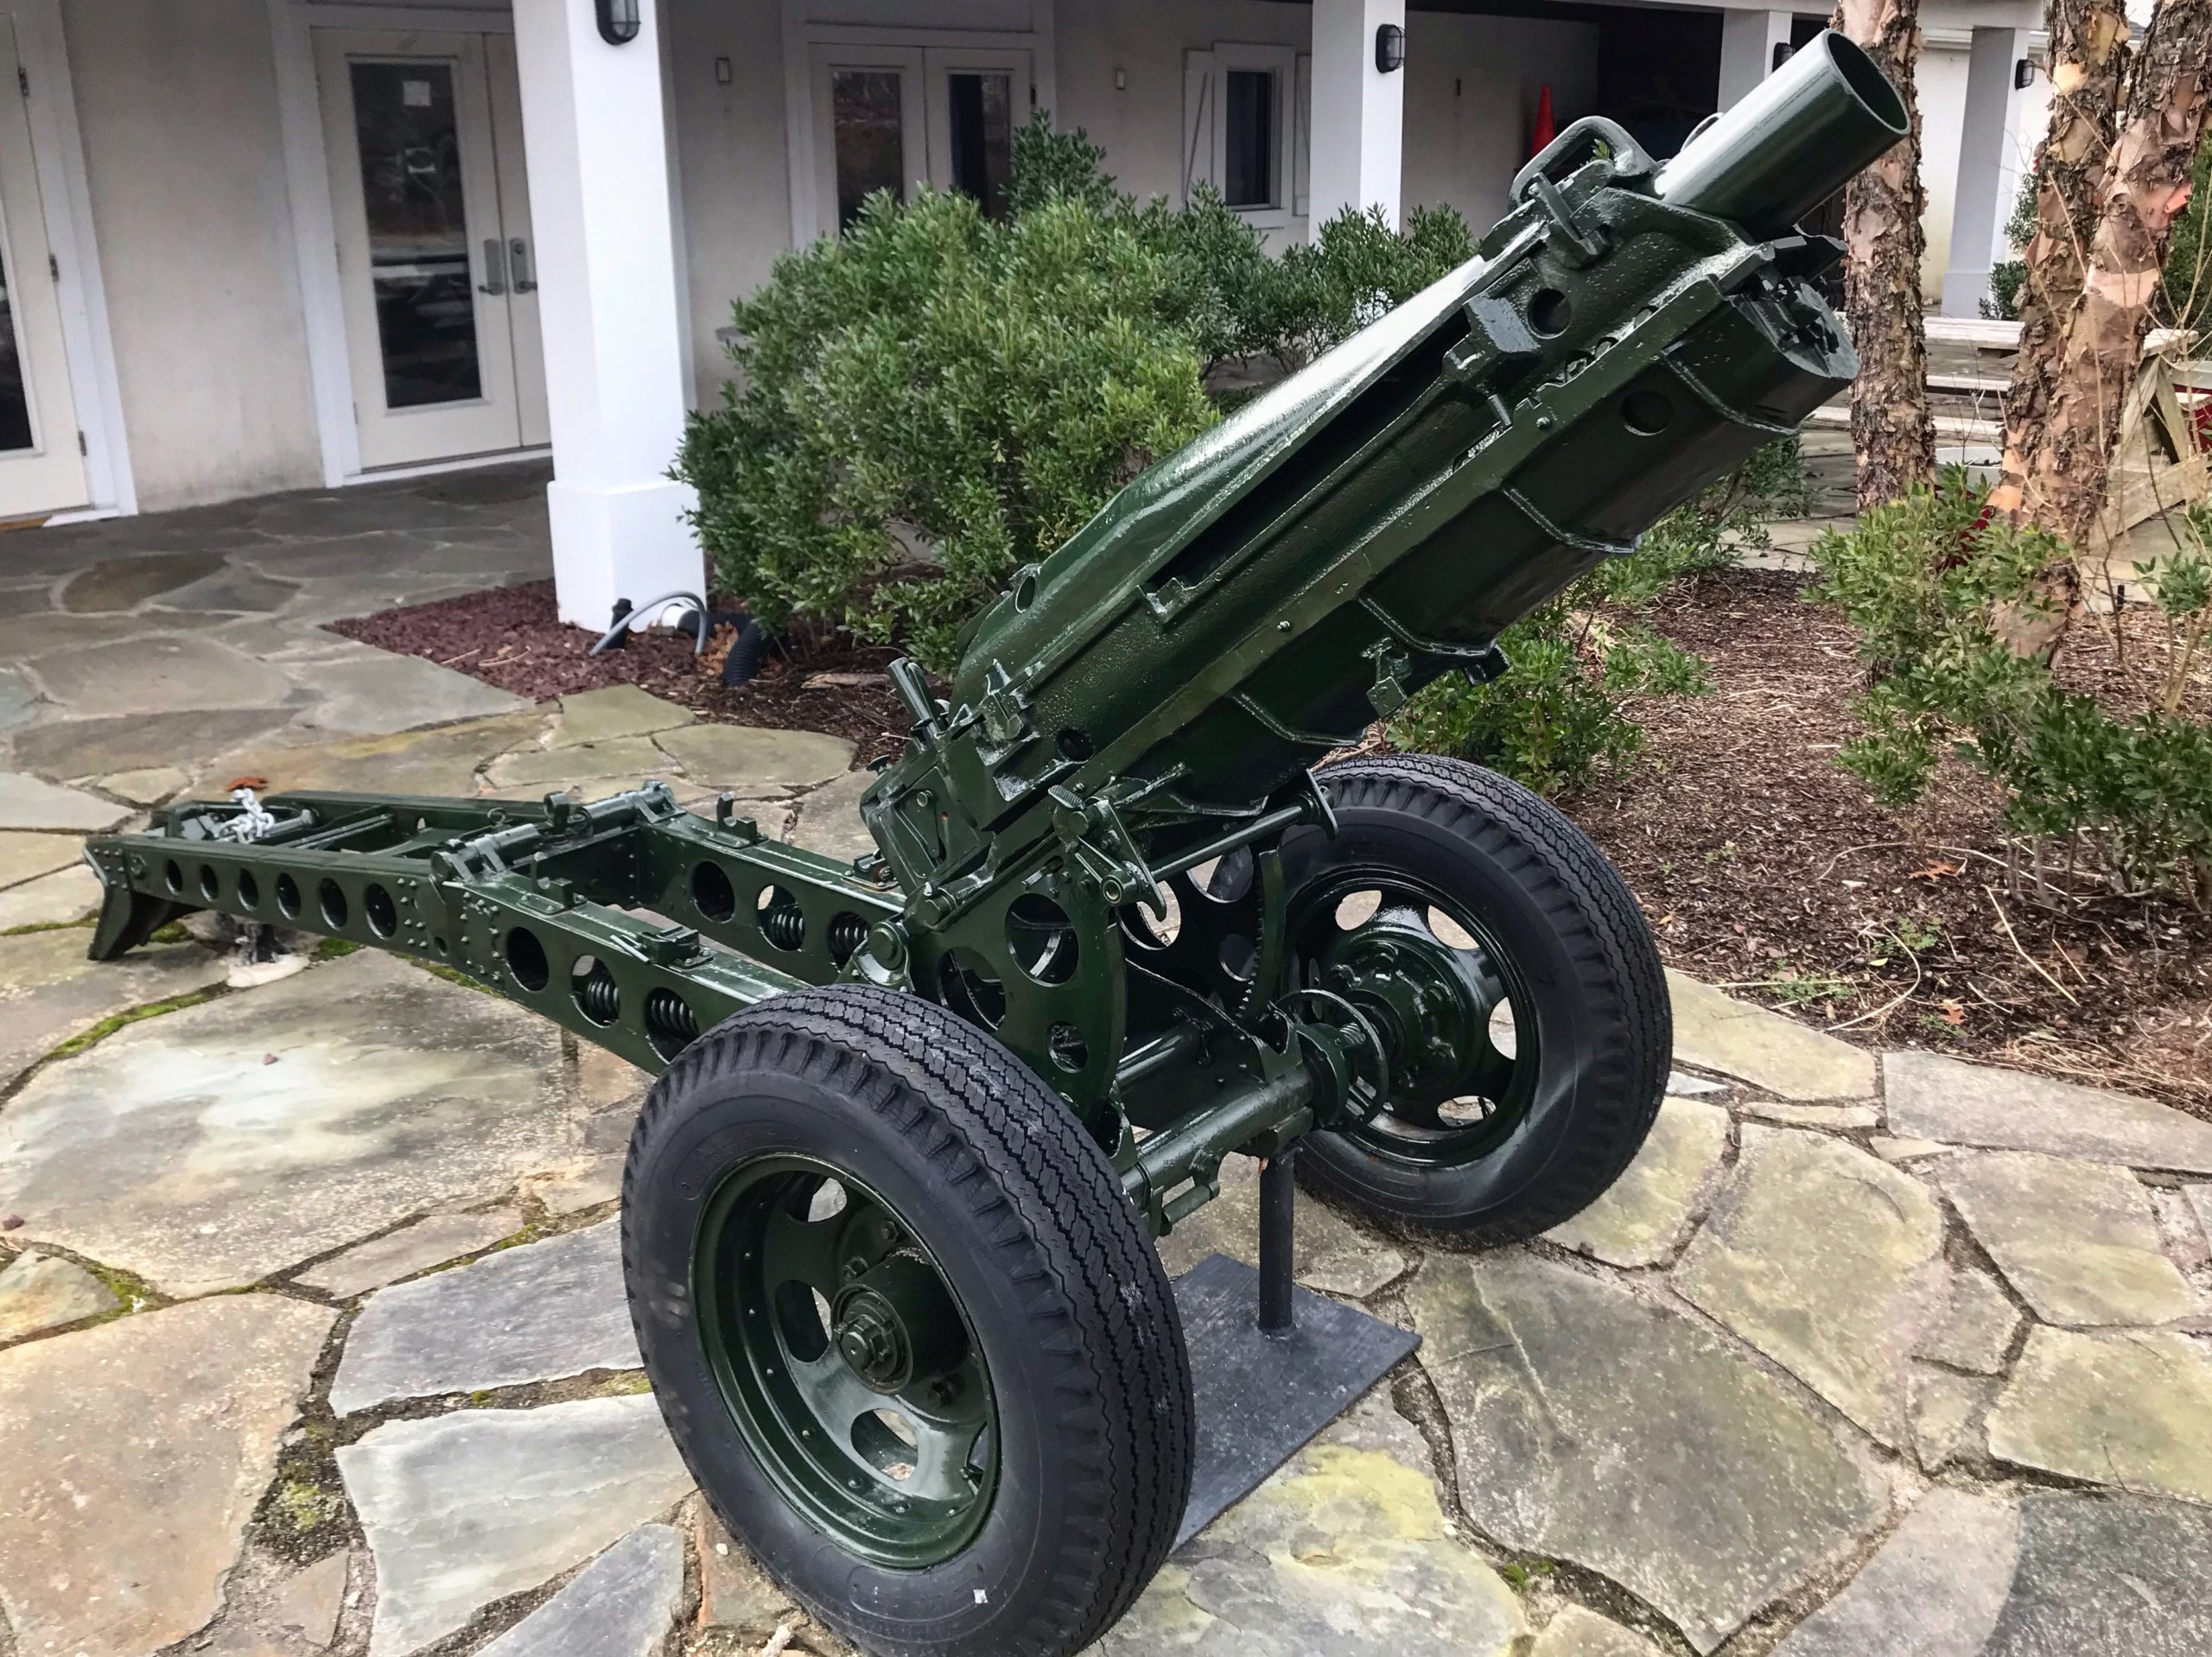 75mm M1A pack Howitzer at the Dayton-Soehlke-Ohlhorst Veterans Memorial VFW Post 5350 in Westhampton Beach 